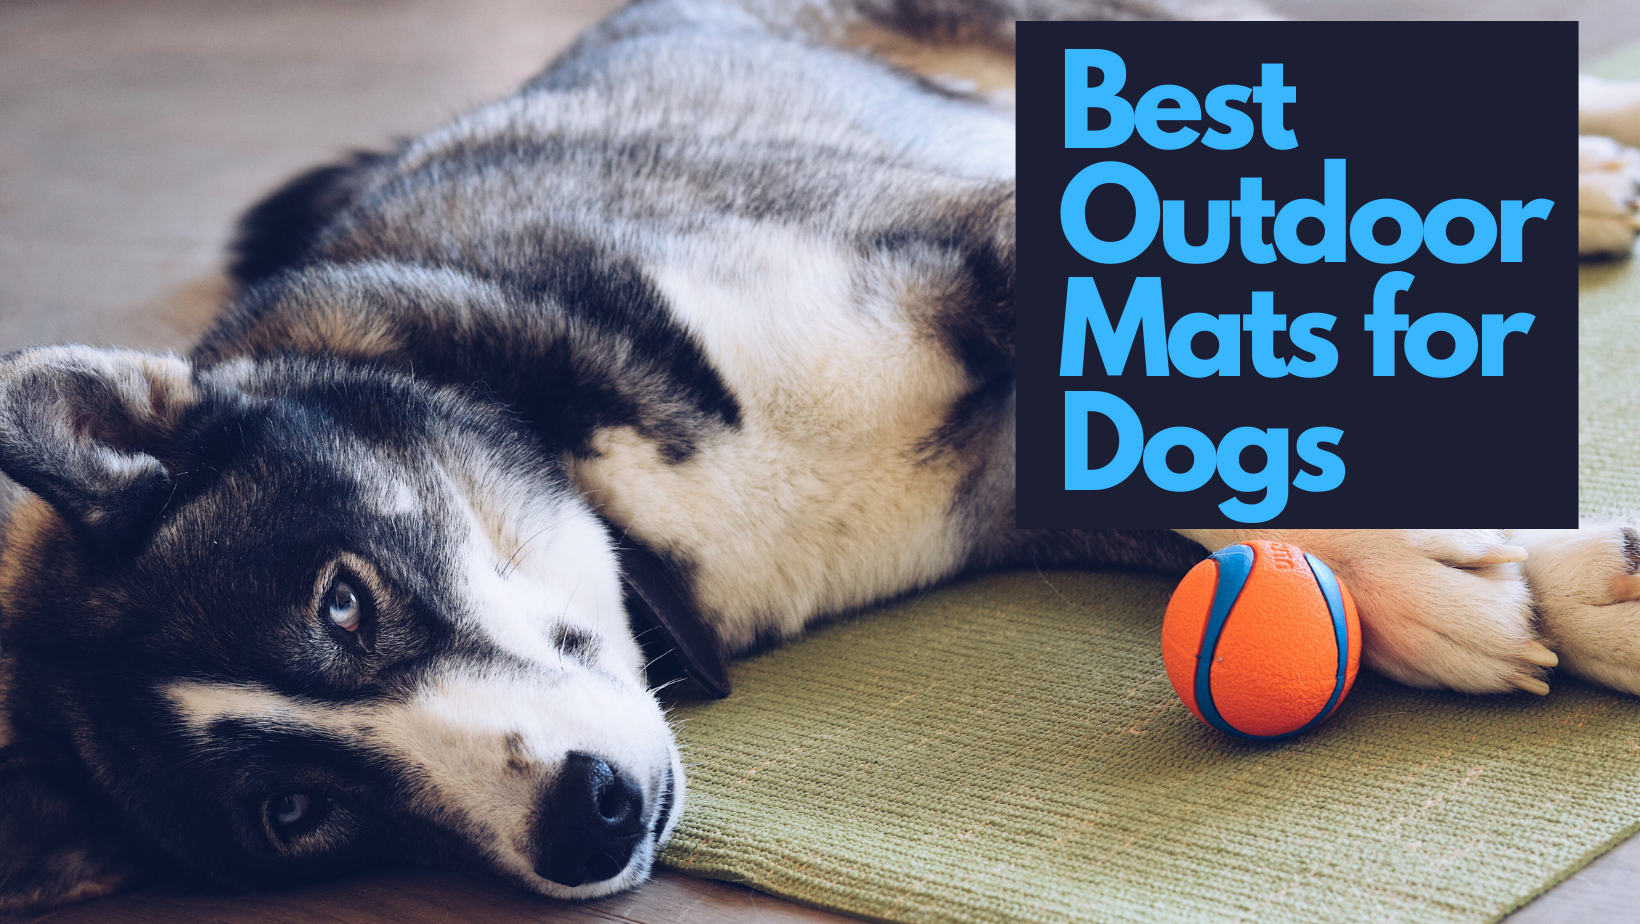 Best Outdoor Mats for Dogs